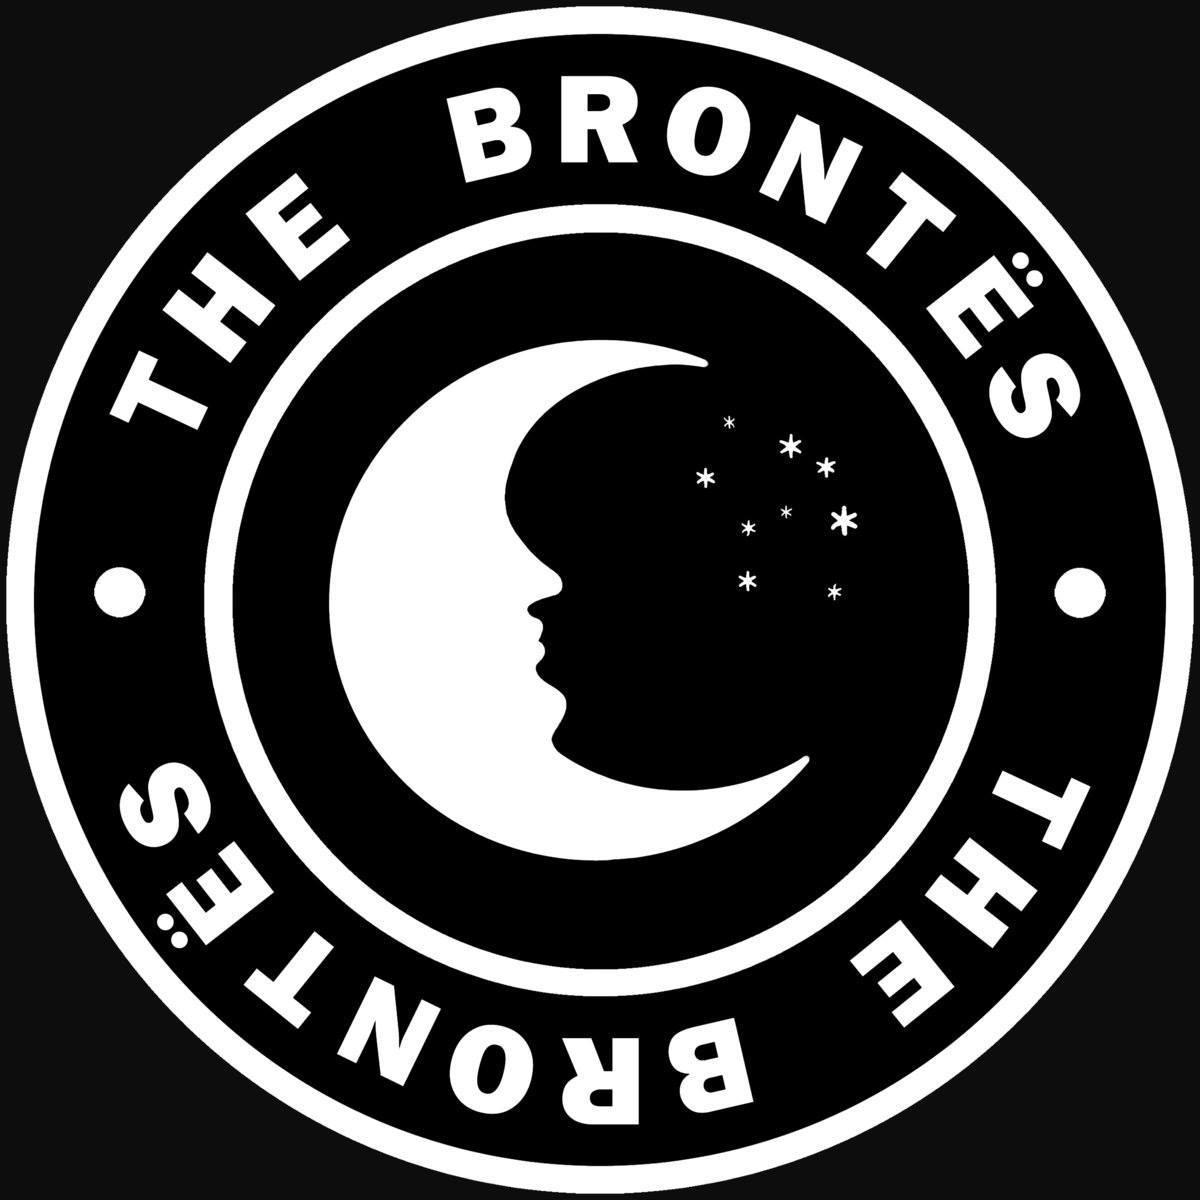 The Brontës at The Rum Shack Glasgow